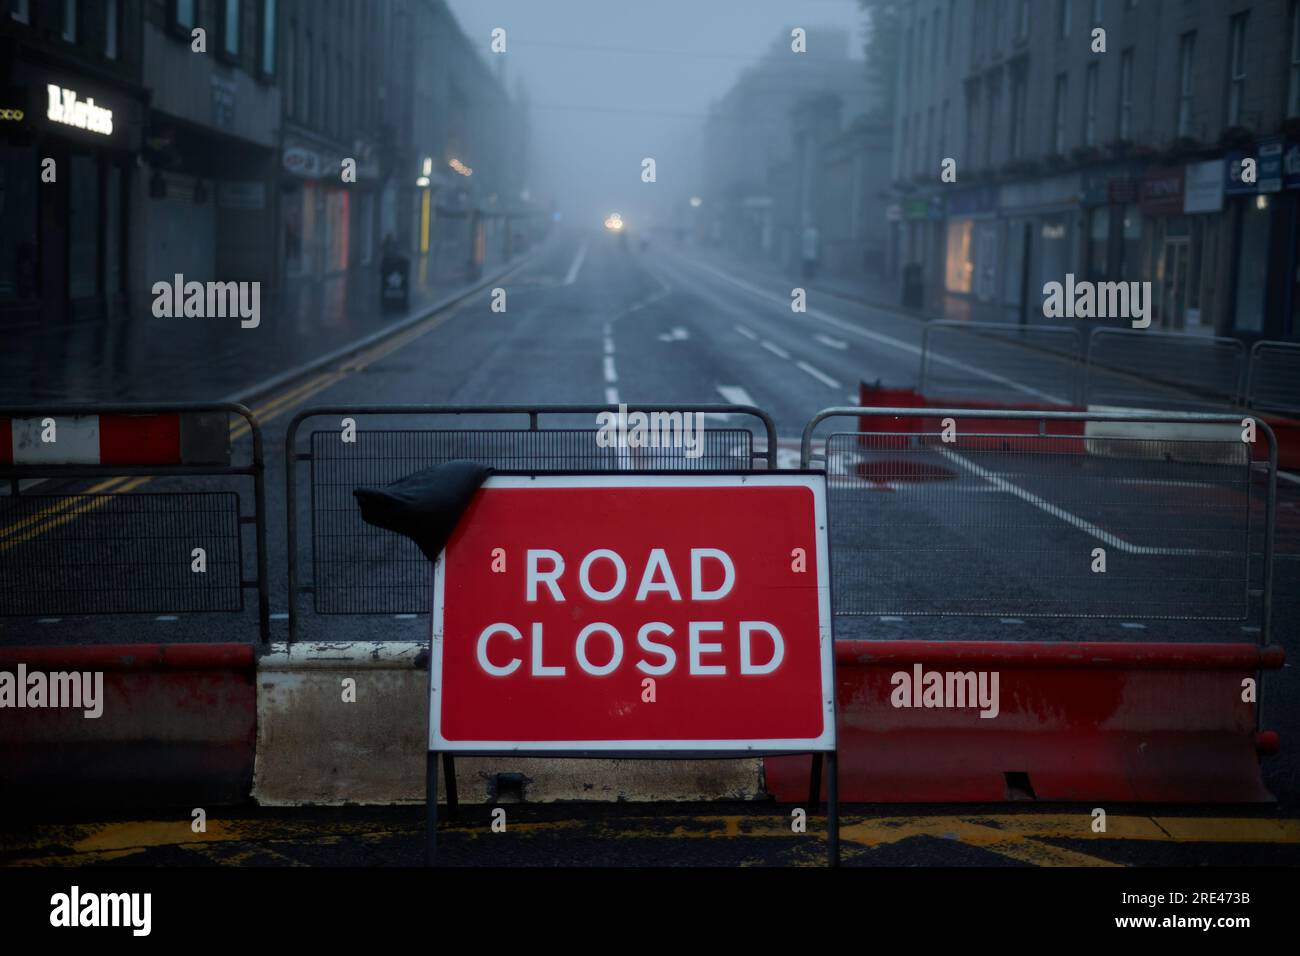 Road closed sign in empty city with street lights. Stock Photo